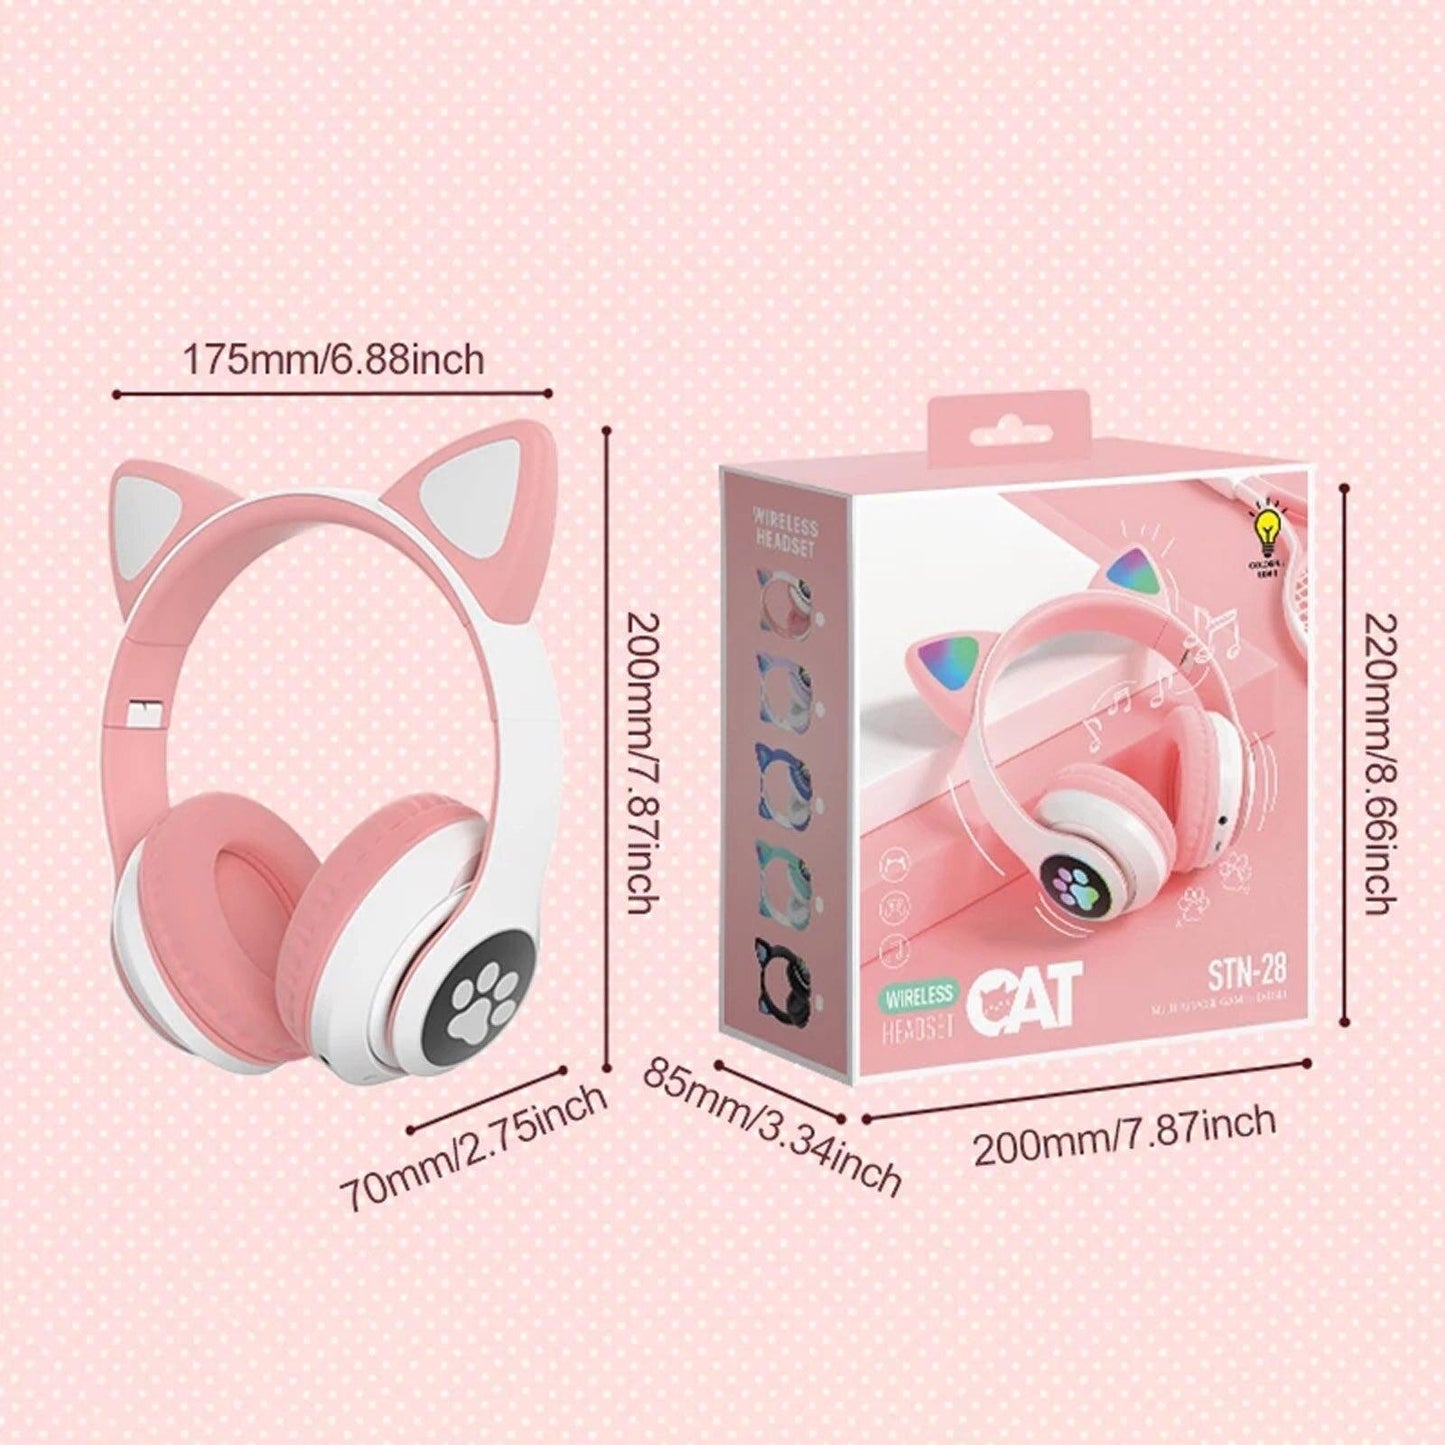 STN-28 Foldable Over Ear Music Headset with Glowing Cat Ear Headphones, Wireless BT5.0 Earphone, Mic, and LED Lights for PC and Mobile Devices - CALCUMART